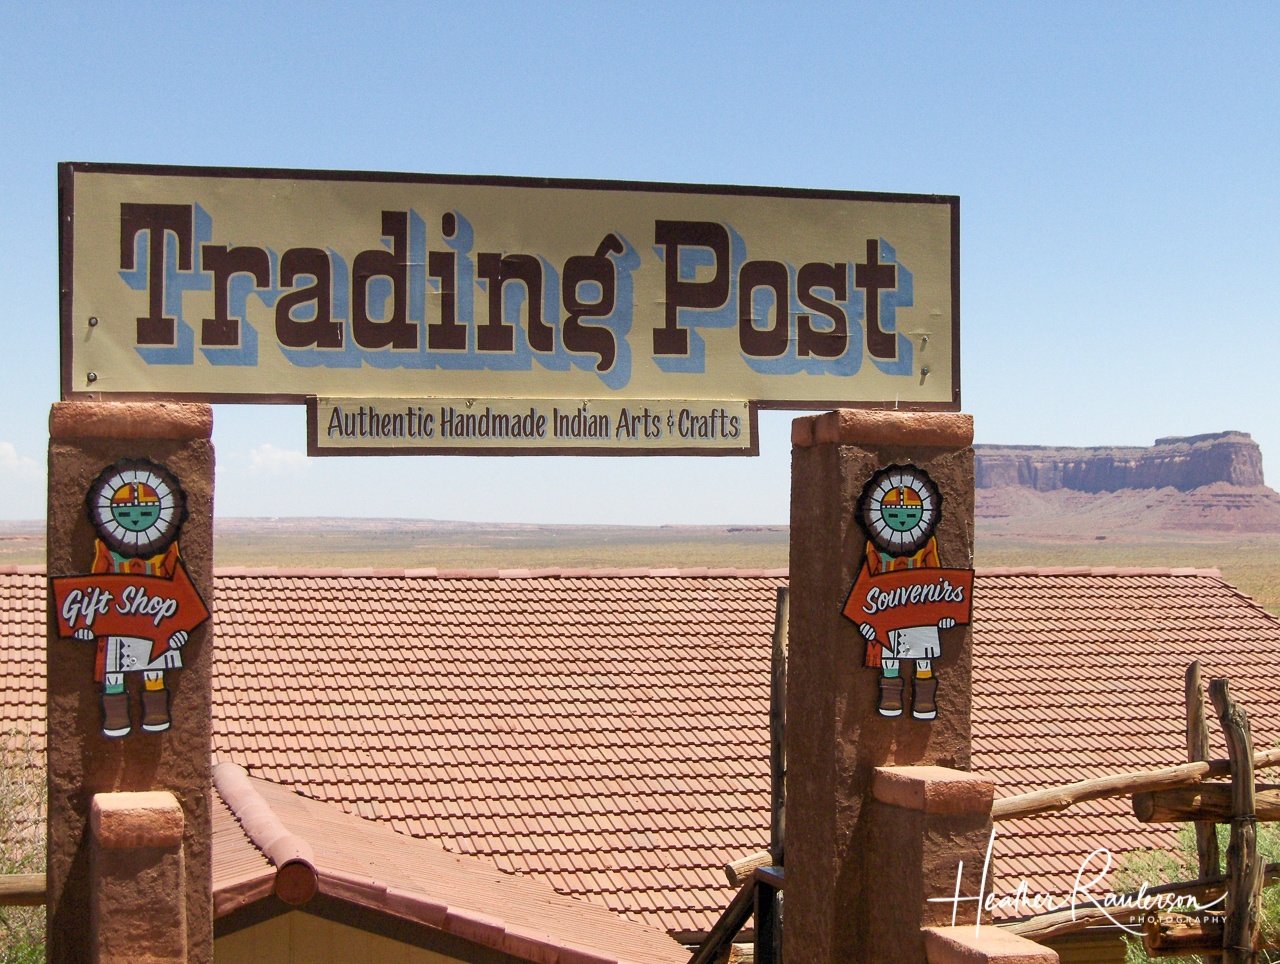 Goulding's Trading Post